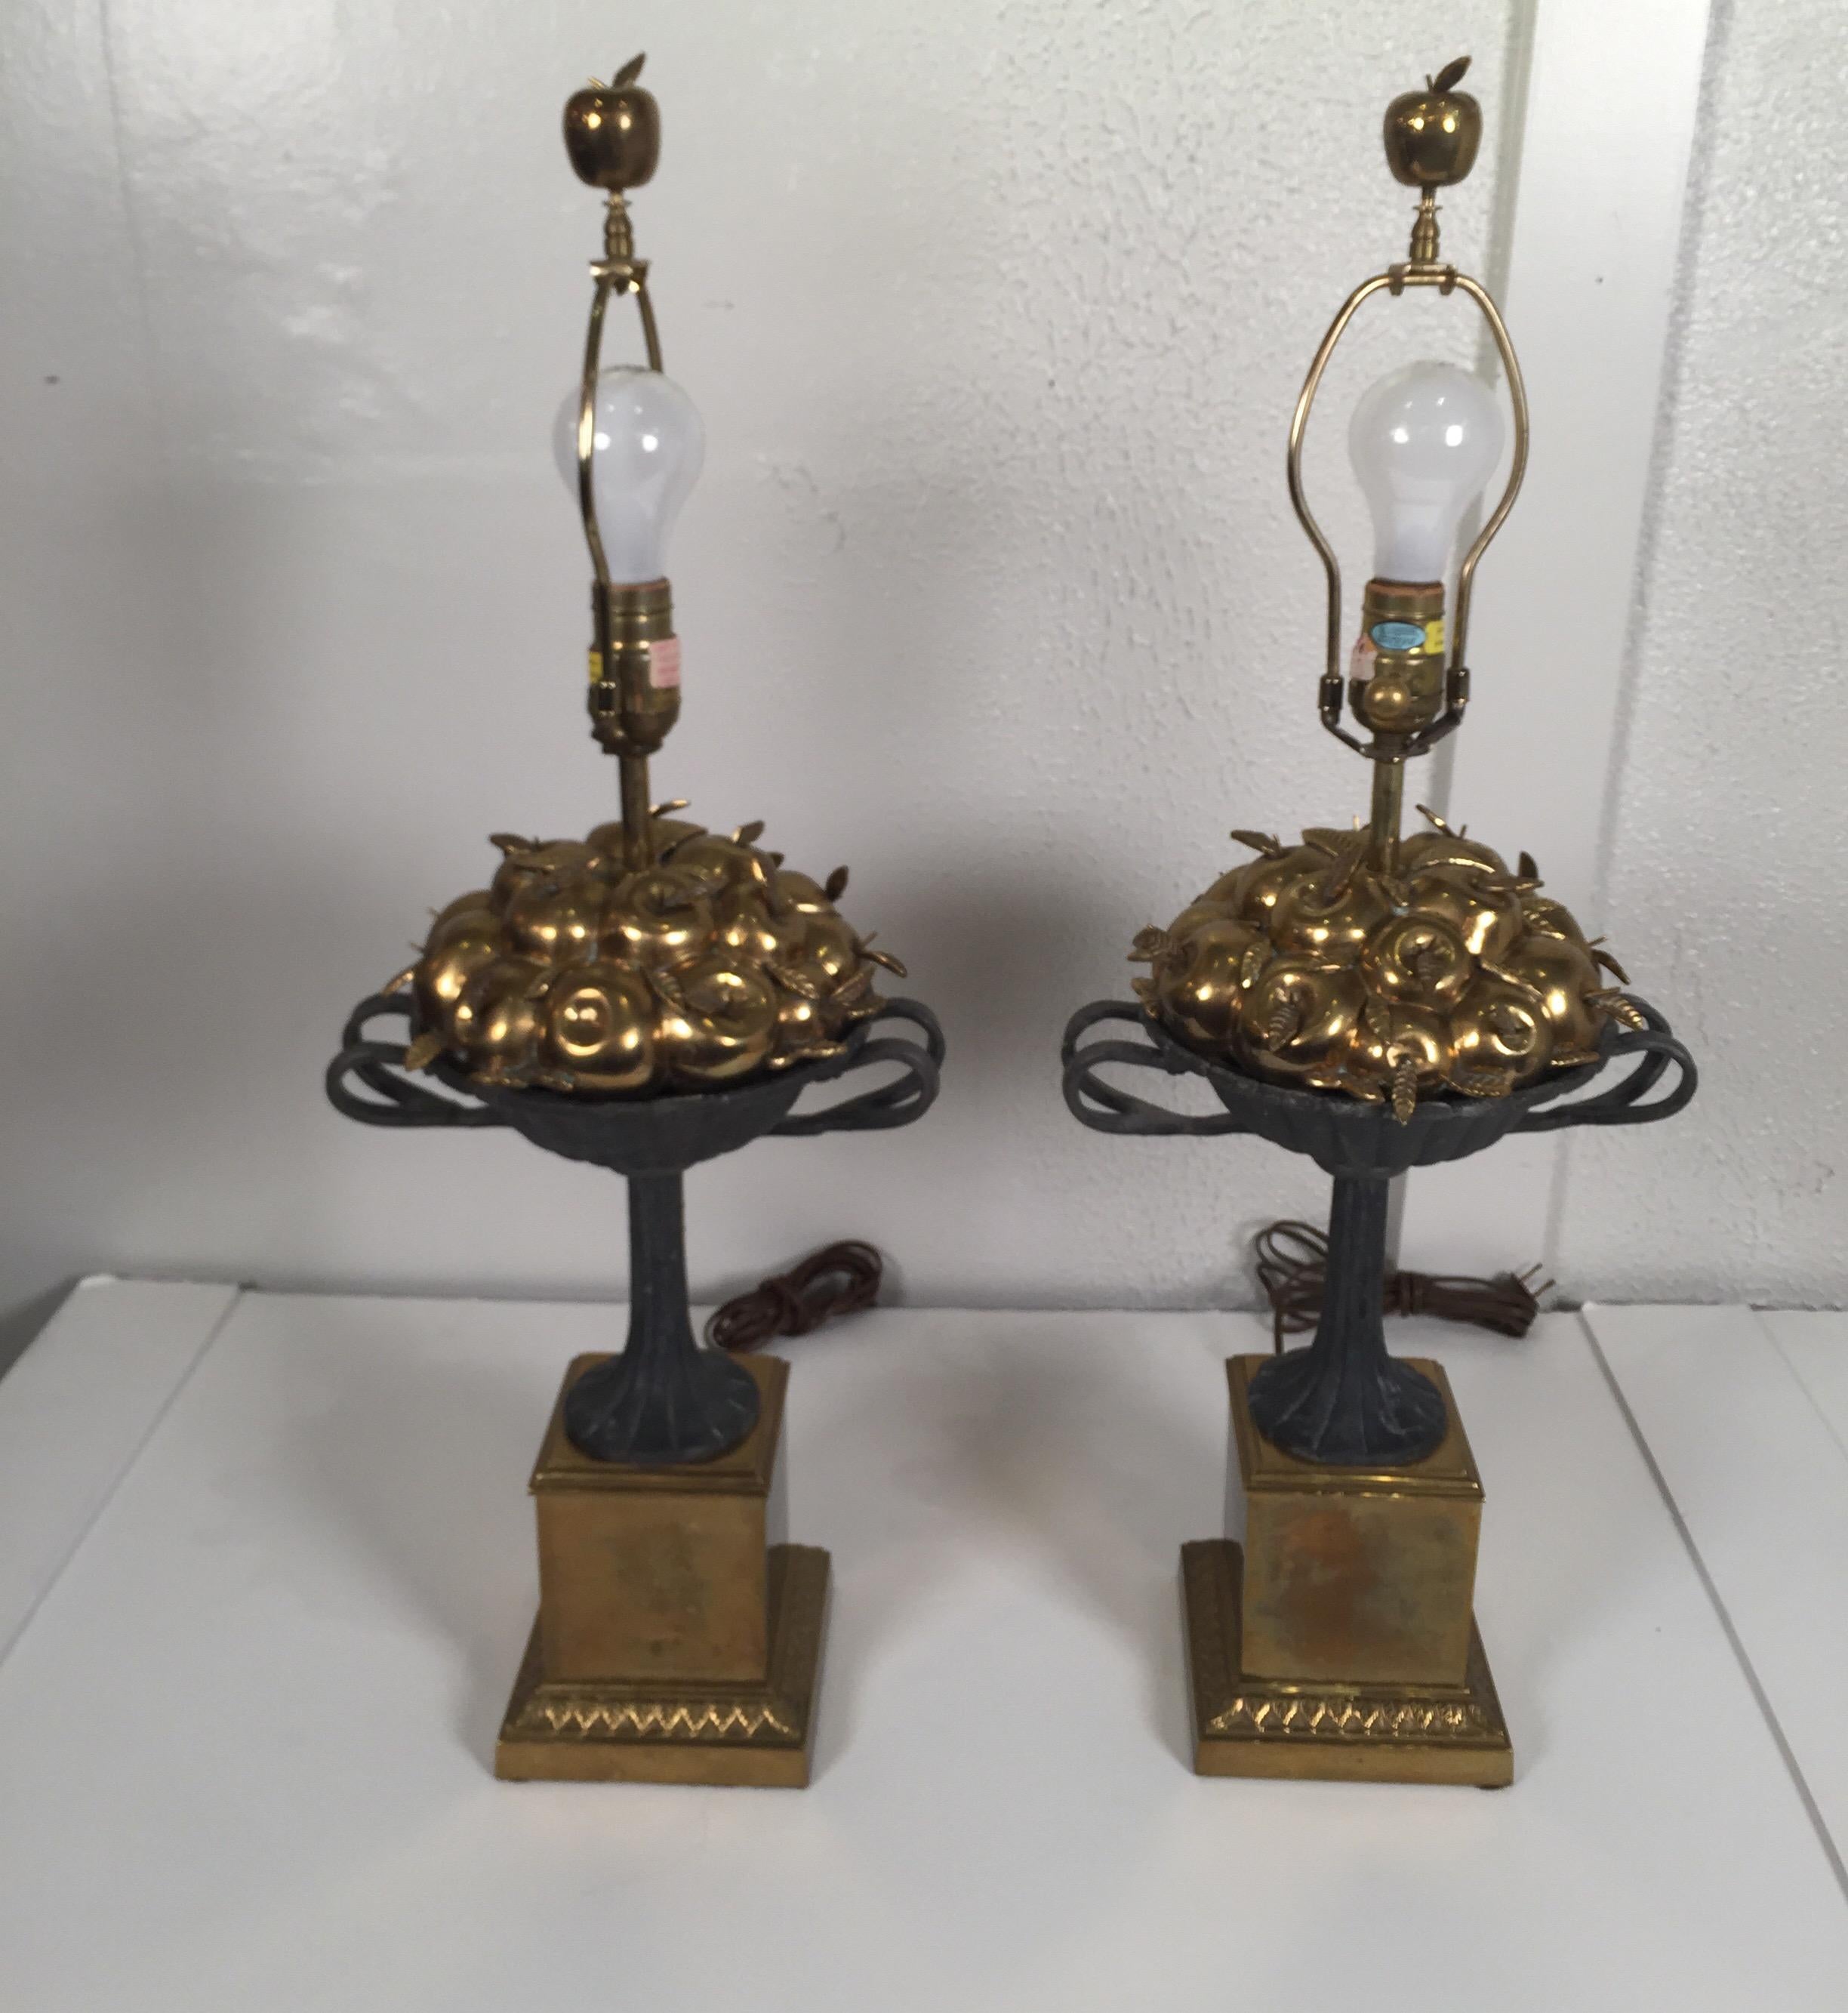 A whimsical pair of cast brass and iron lamps if the form of garden urns. The urns abundantly filled with apples in brass with iron urns with double handles. The finials on each are cast brass apples and original to the lamps. The simple drum shades